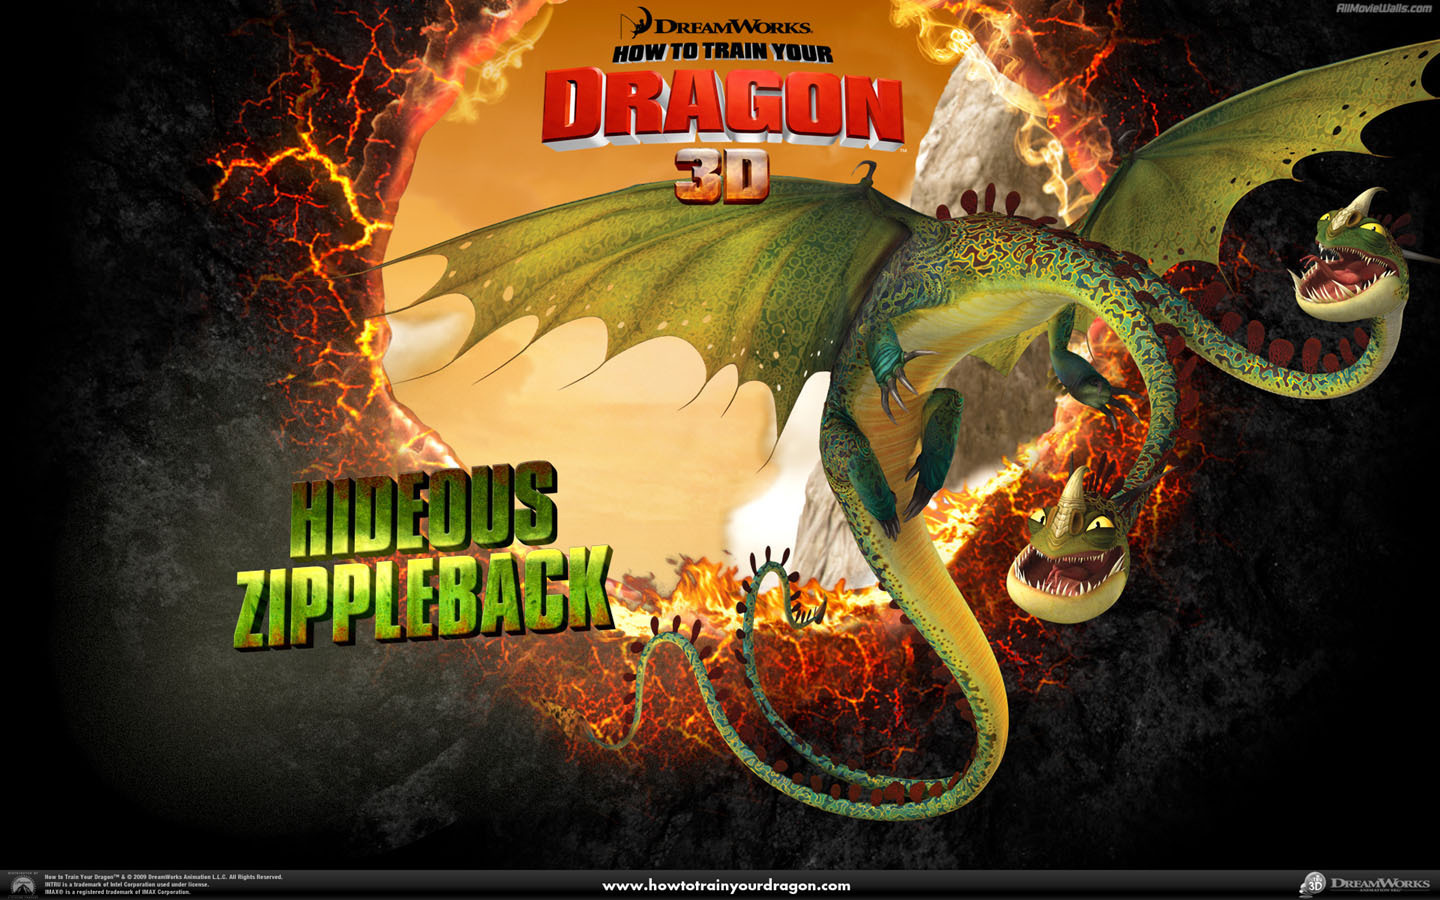 How to Train Your Dragon - Movies Wallpaper (10738417) - Fanpop